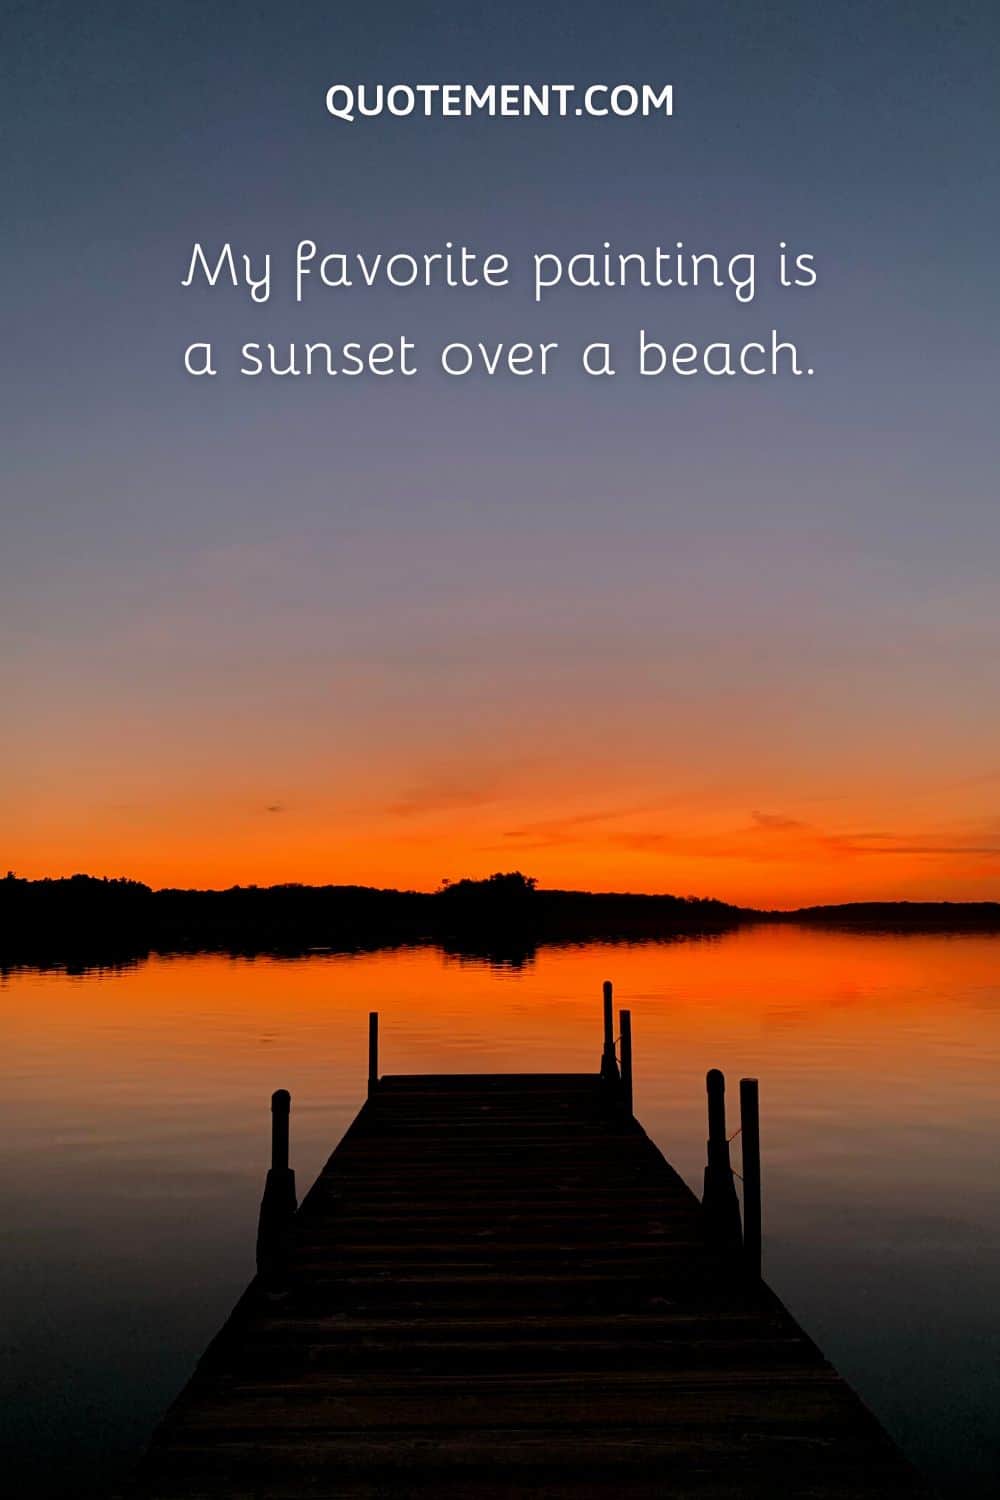 My favorite painting is a sunset over a beach.